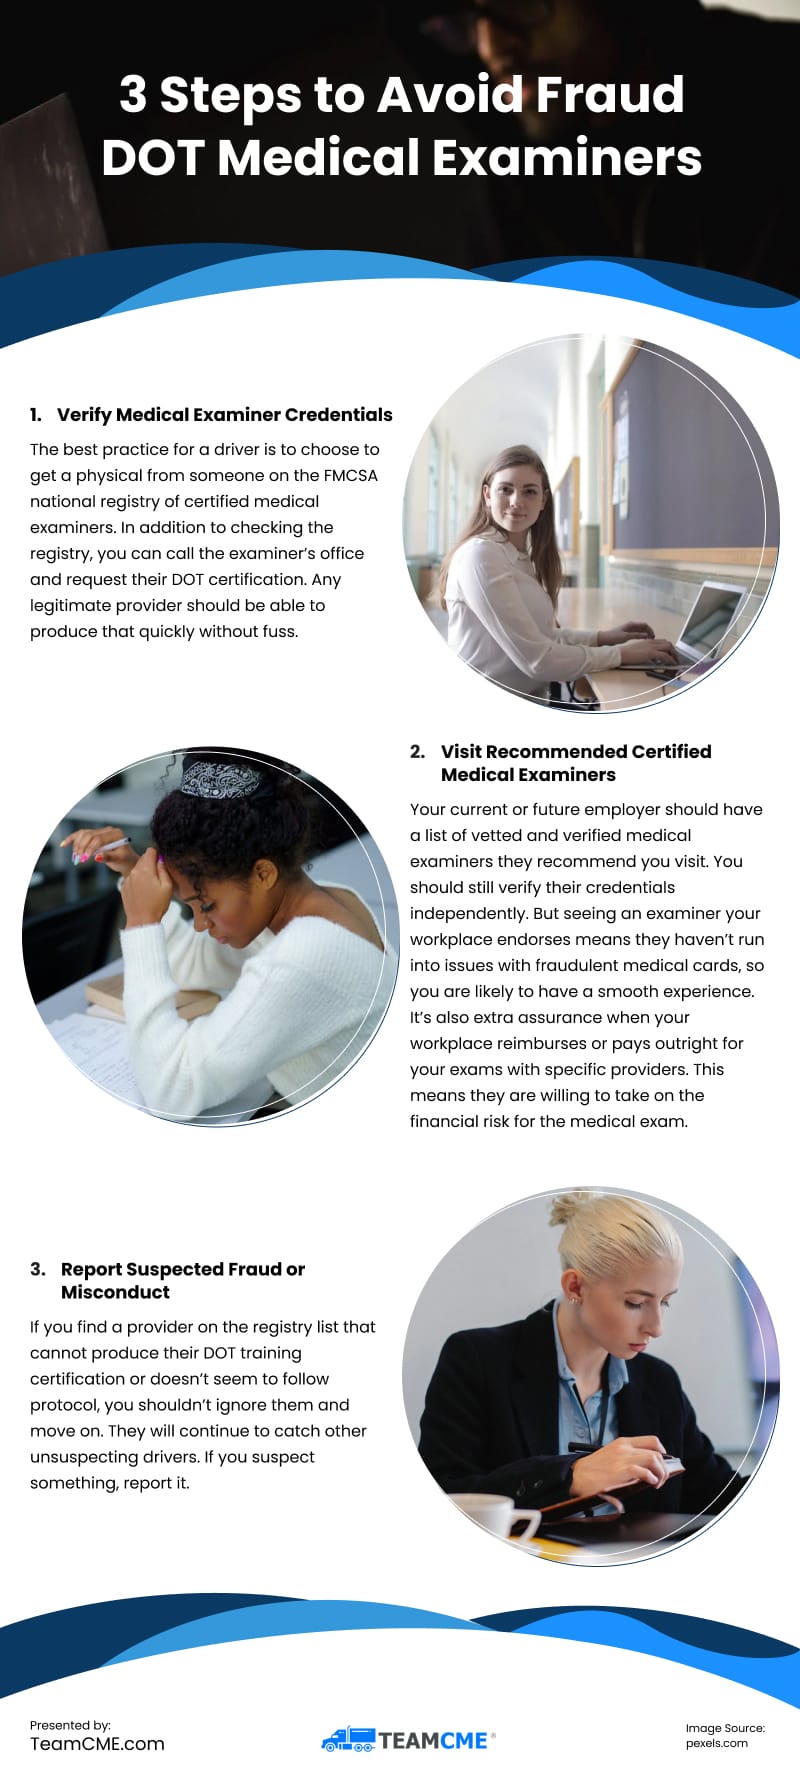 3 Steps to Avoid Fraud DOT Medical Examiners Infographic